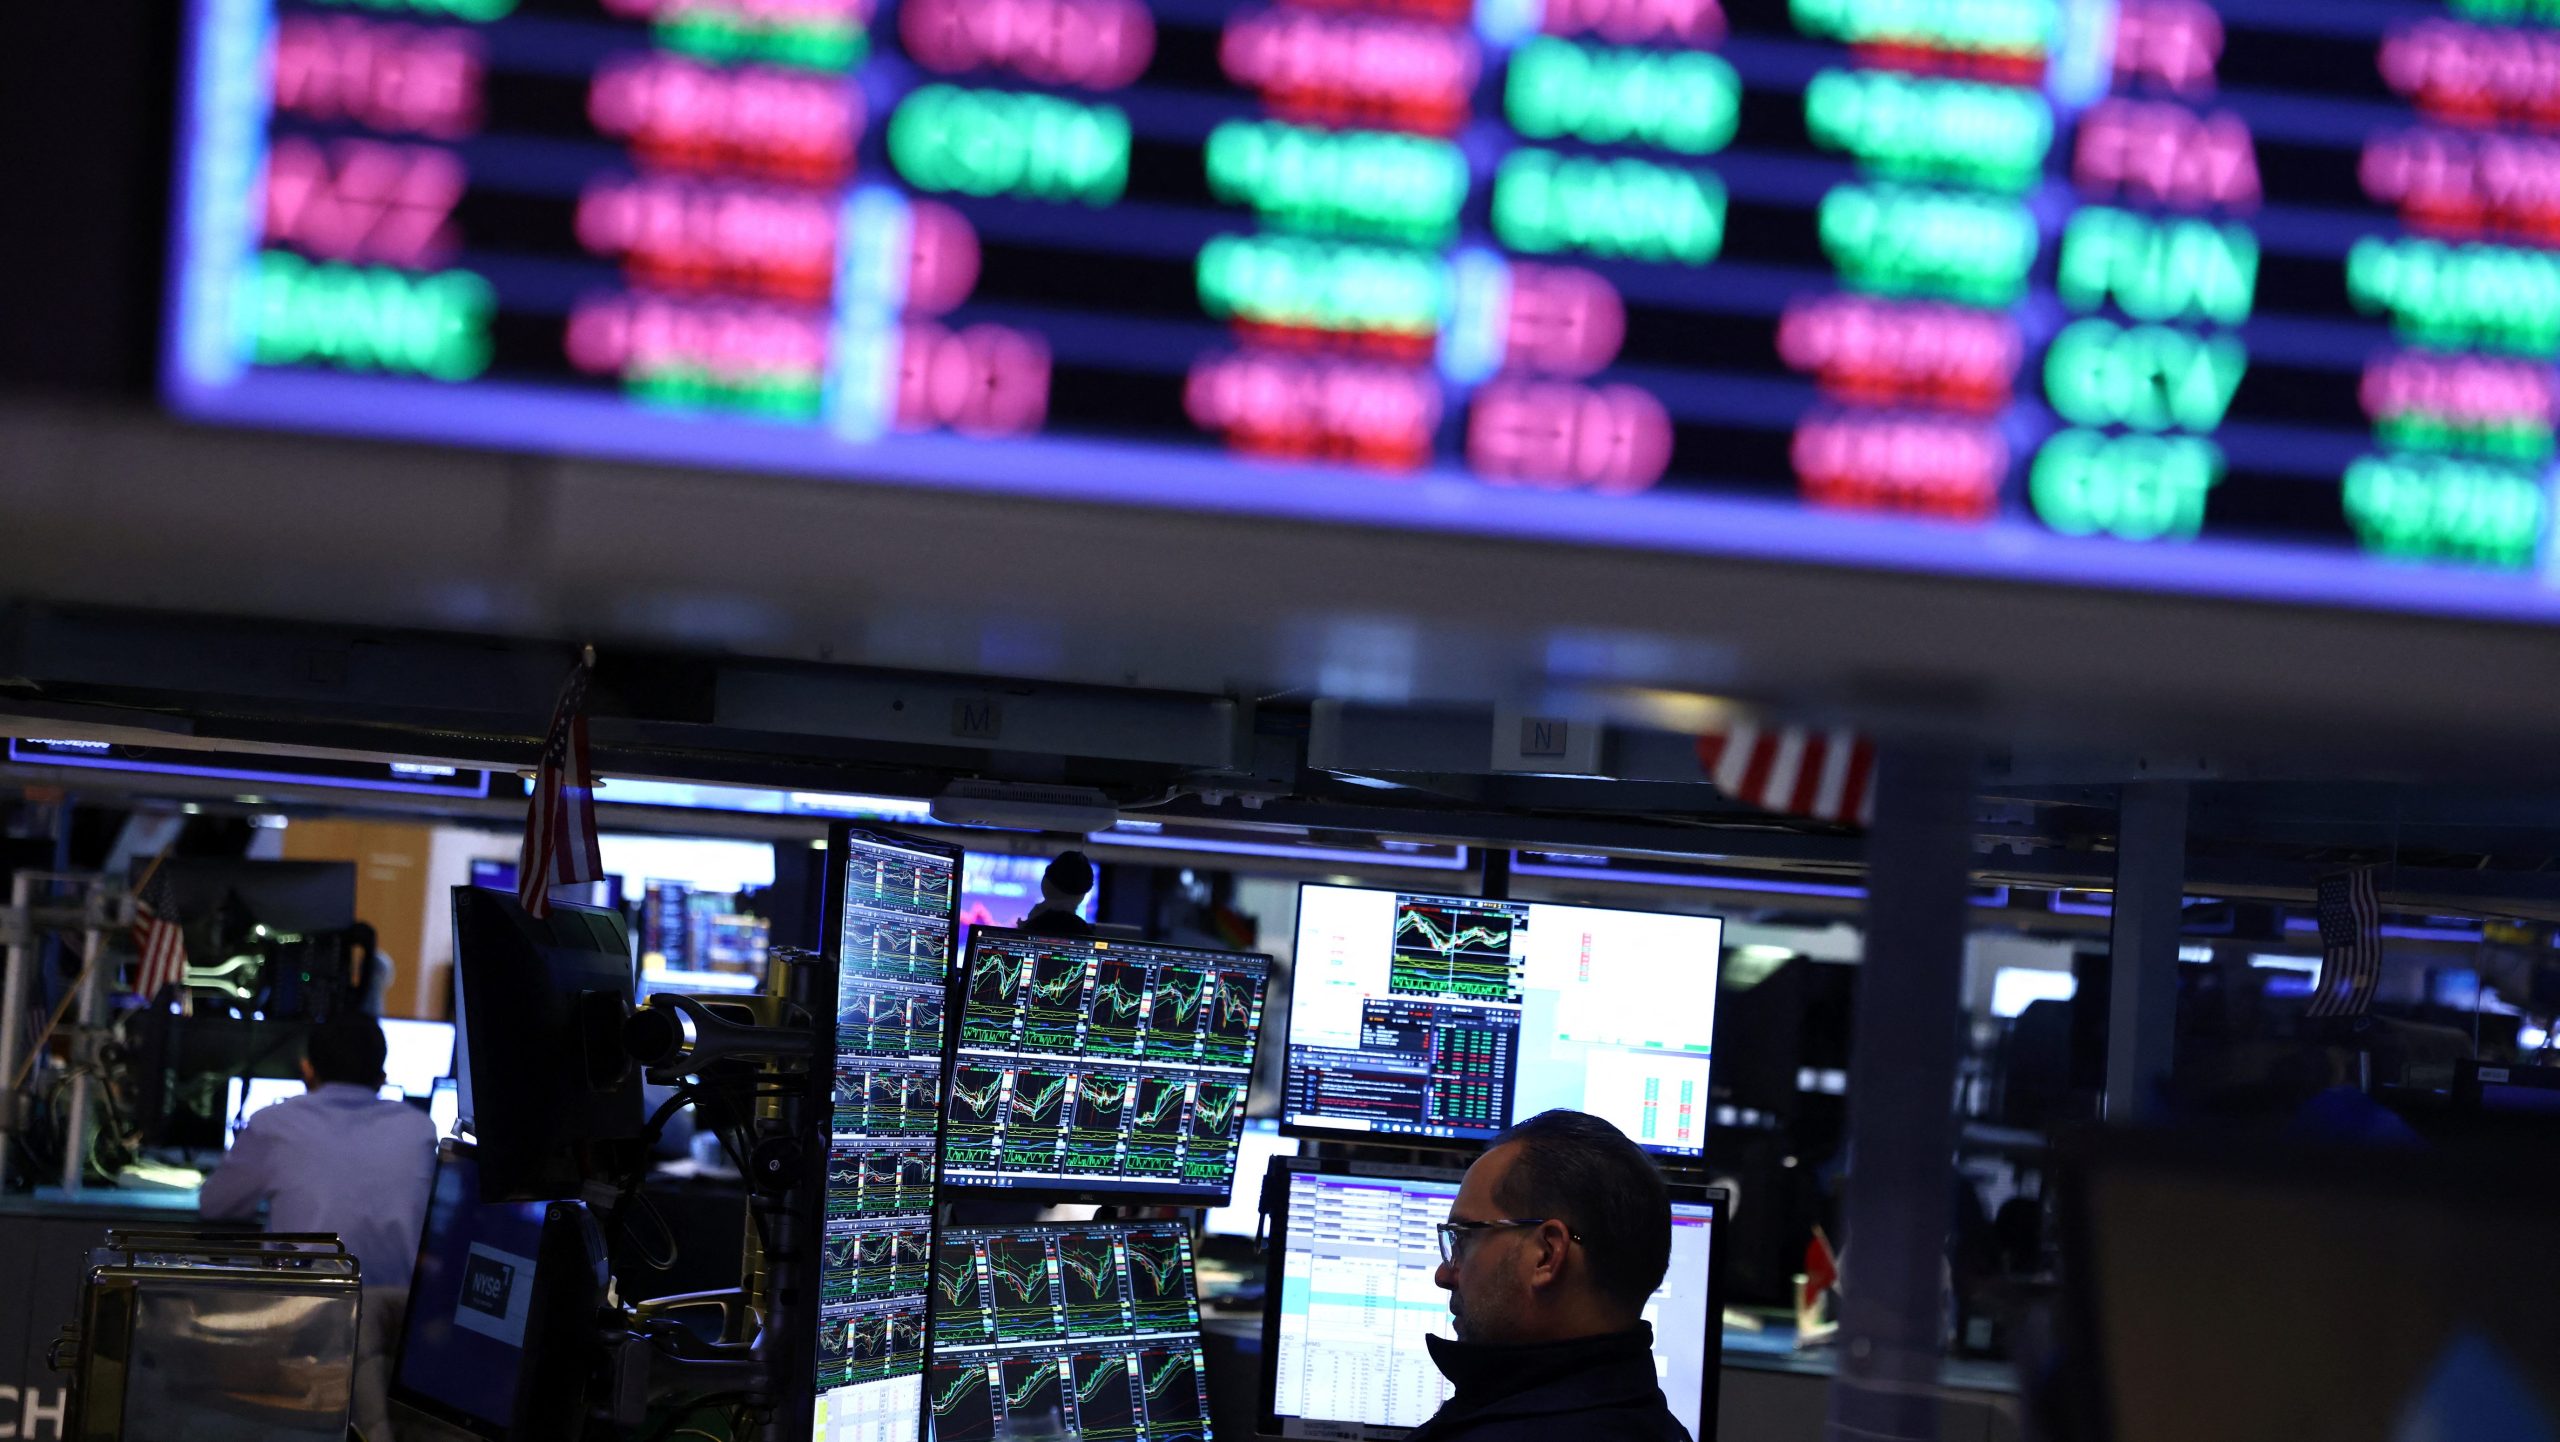 Traders work on the trading floor at the New York Stock Exchange (NYSE) in New York City